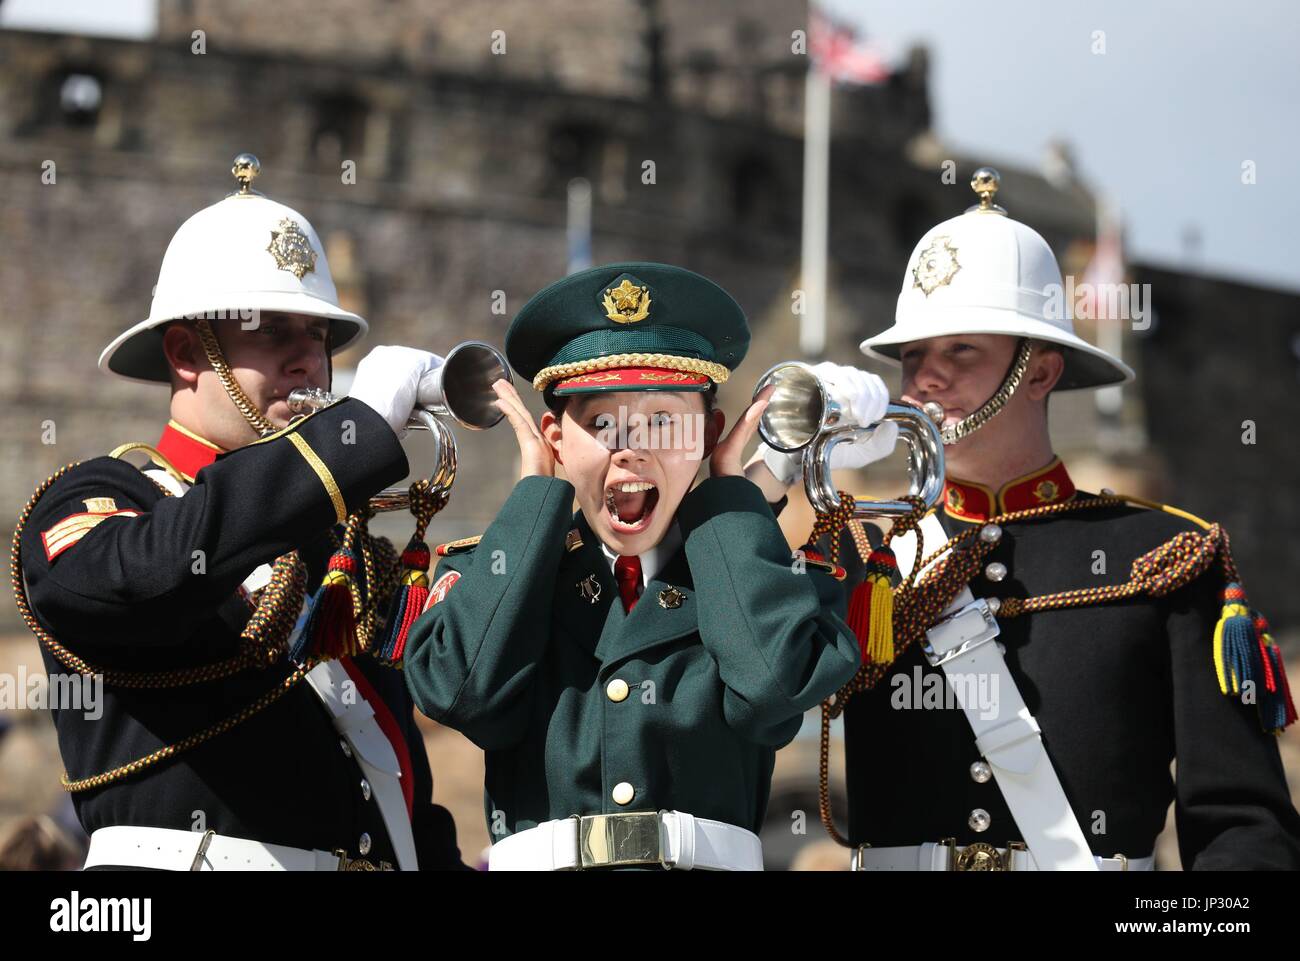 Buglers Sergeant Nathan Crossley(l) and Jason Morris from the Massed Bands of Her Majesty's Royal Marines with Sergeant Ayami Nakama from Japan's Ground Self Defence Force Central Band during a photocall on the Edinburgh Castle esplanade after the Royal Edinburgh Military Tattoo programme was revealed by Brigadier David Allfrey, chief executive and producer of the Tattoo. Stock Photo